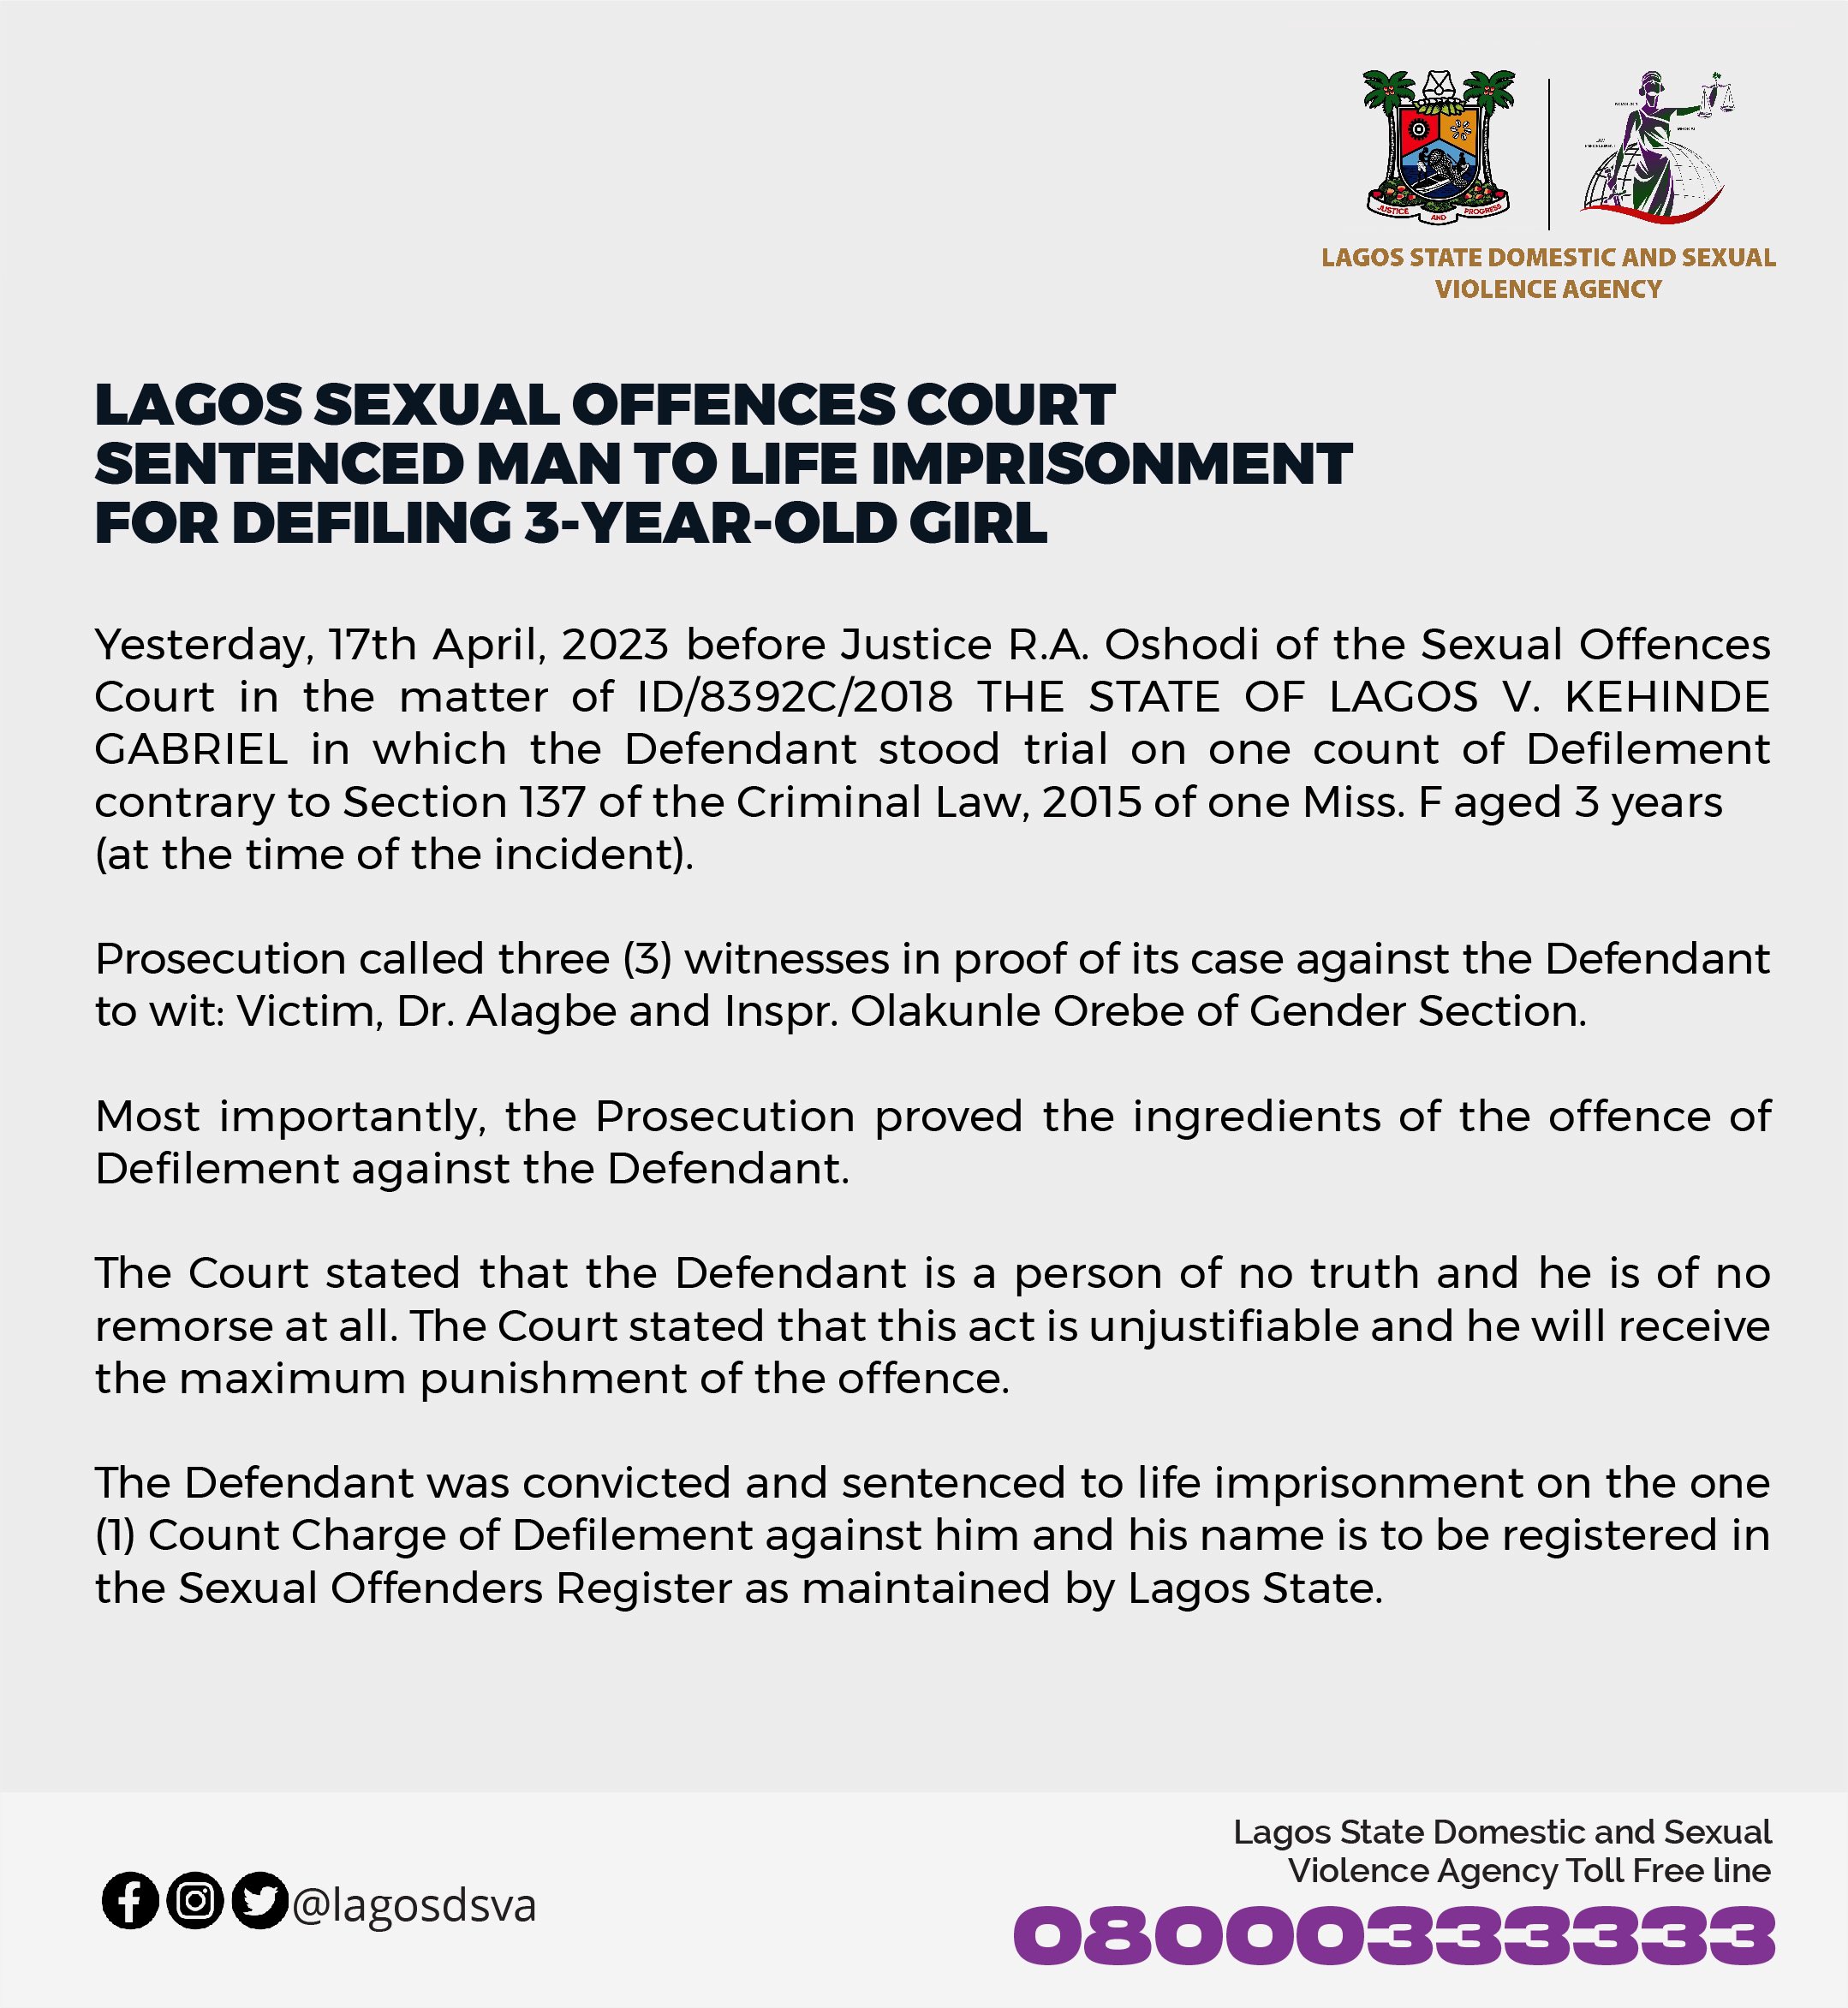 Man sentenced to life imprisonment for raping 3-year-old girl in Lagos